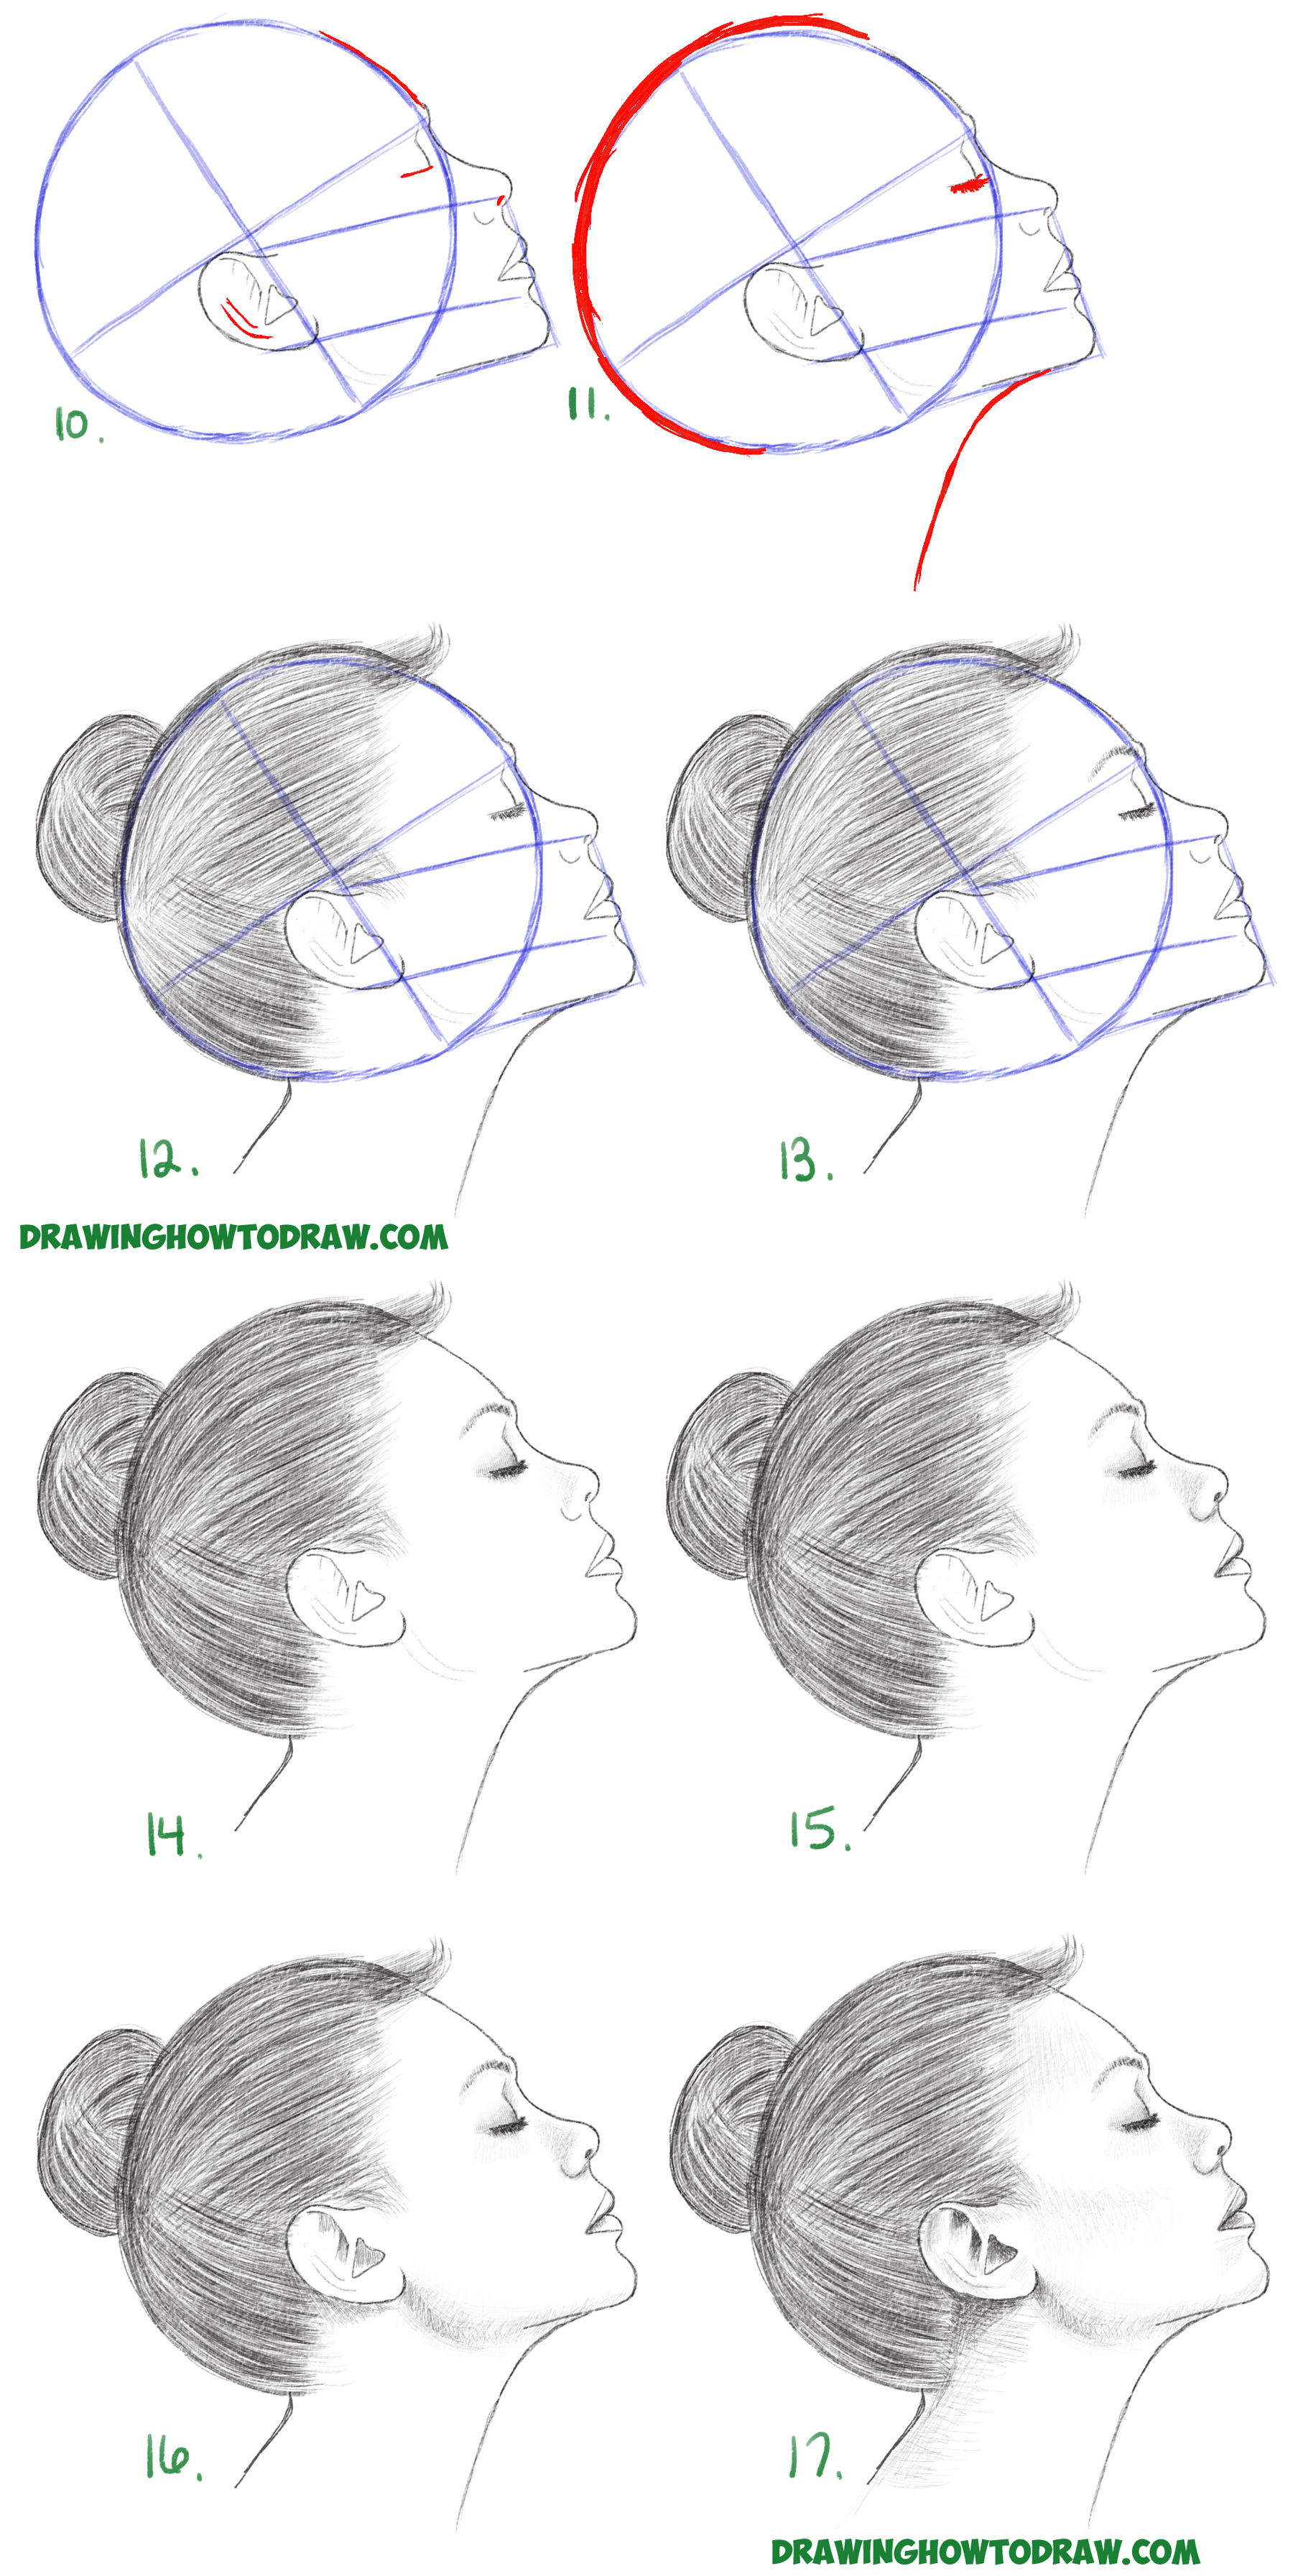 How to Draw a Face from the Side Profile View (Female / Girl / Woman